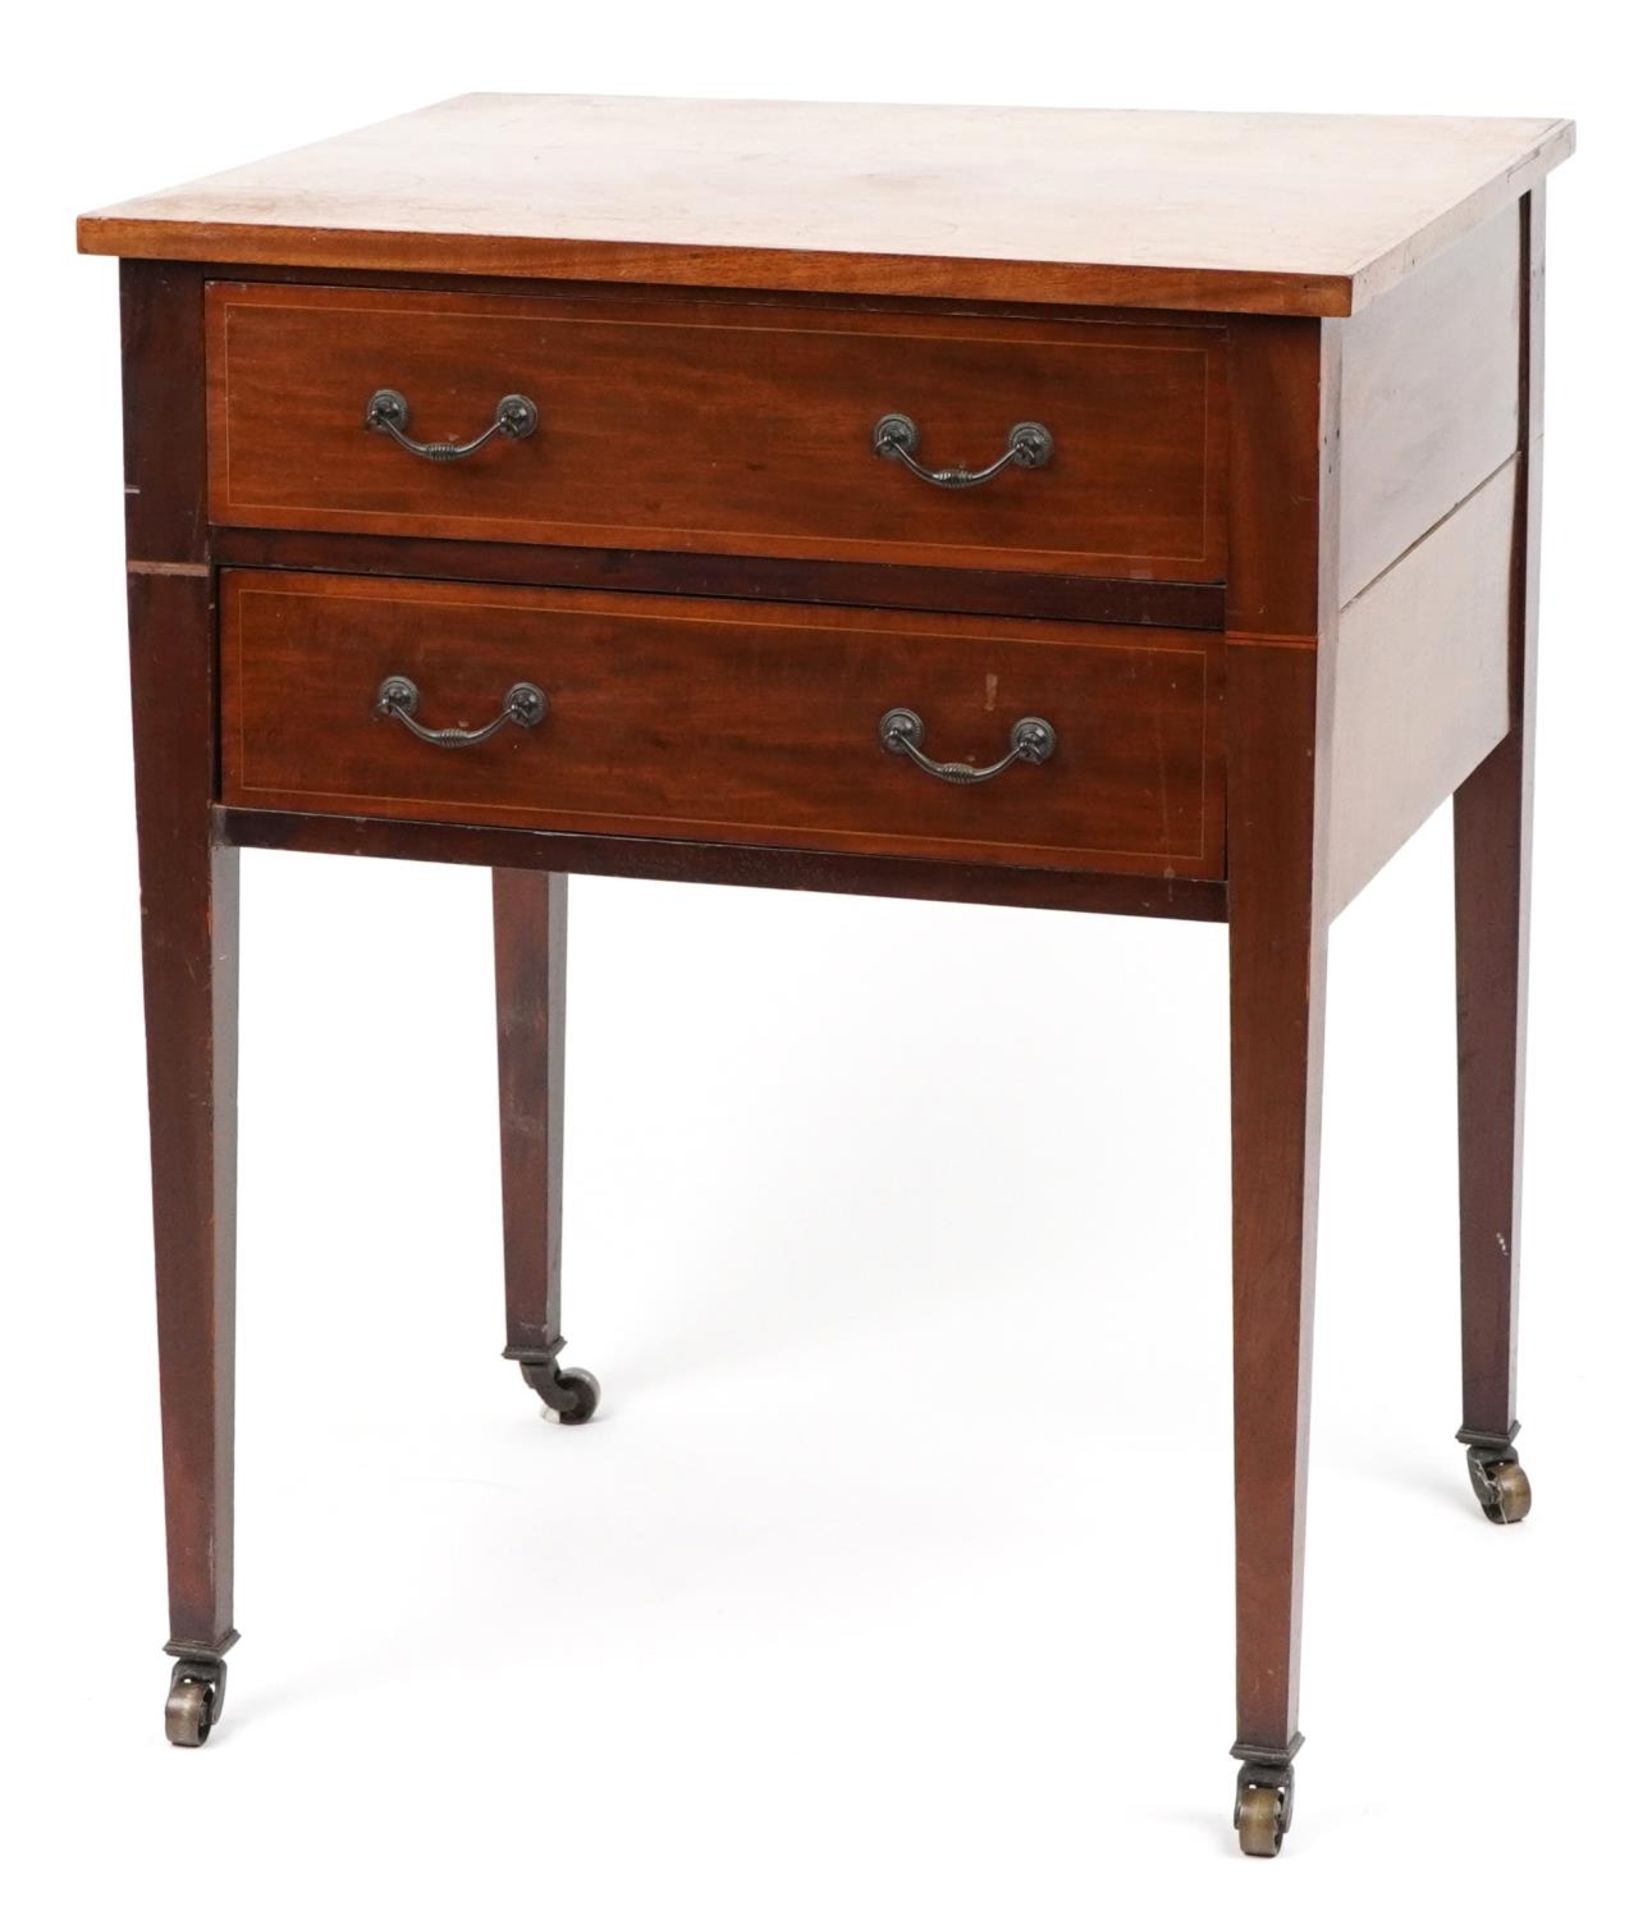 Jas Shoolbred & Co, Edwardian inlaid mahogany two drawer side table on tapering legs, 76cm H x